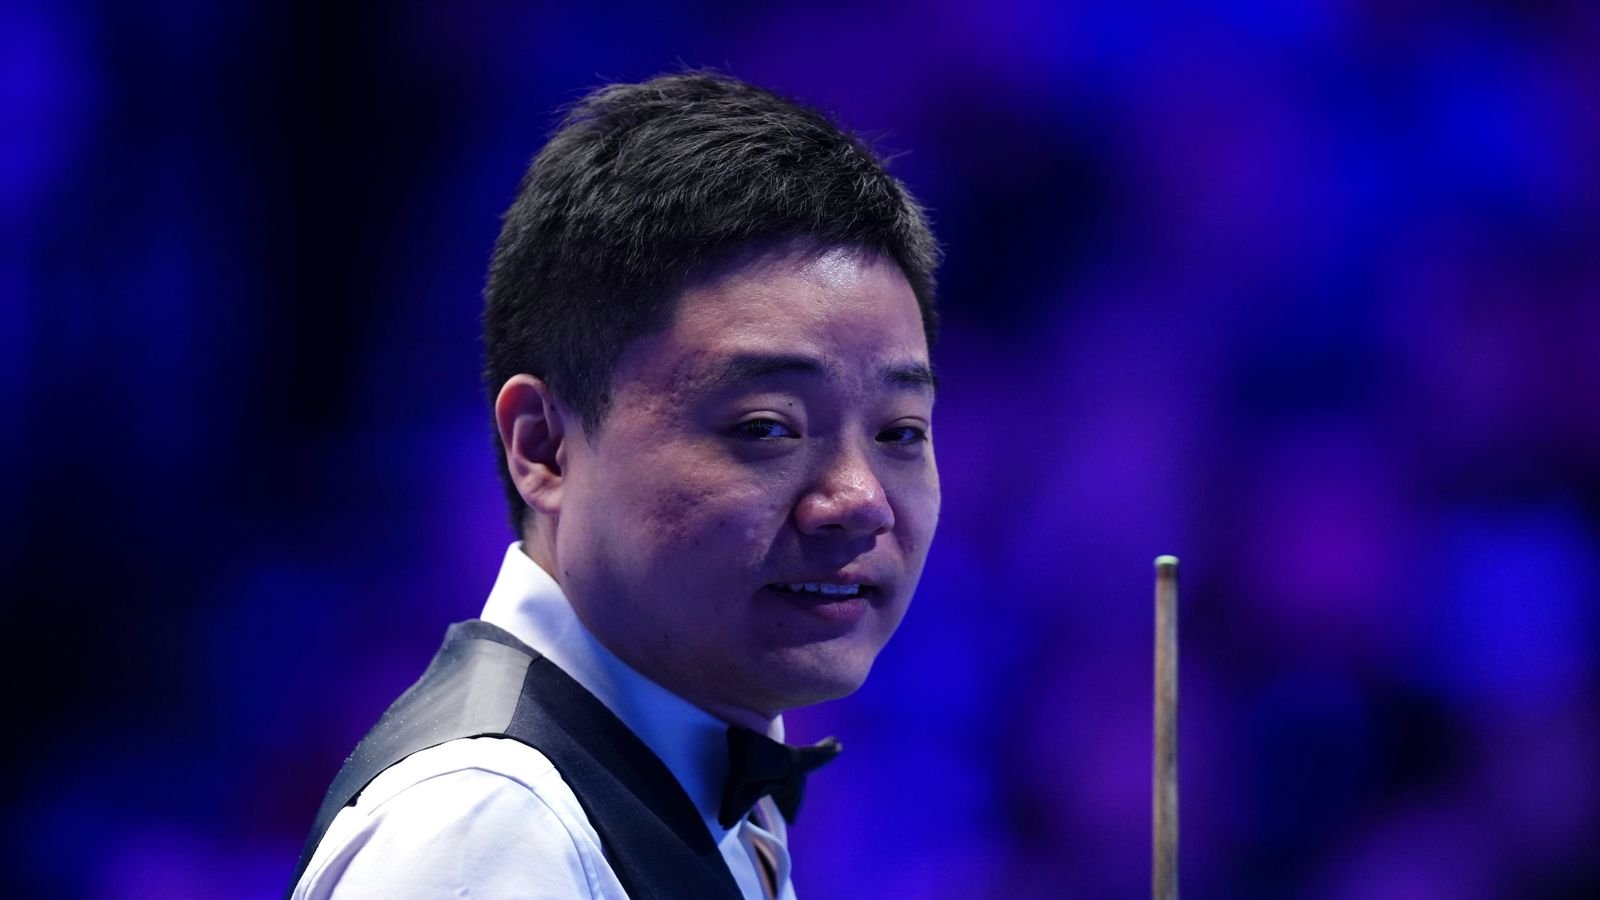 Ding Junhui makes historic 147 maximum break against Ronnie O’Sullivan at the Masters in first round | Snooker News